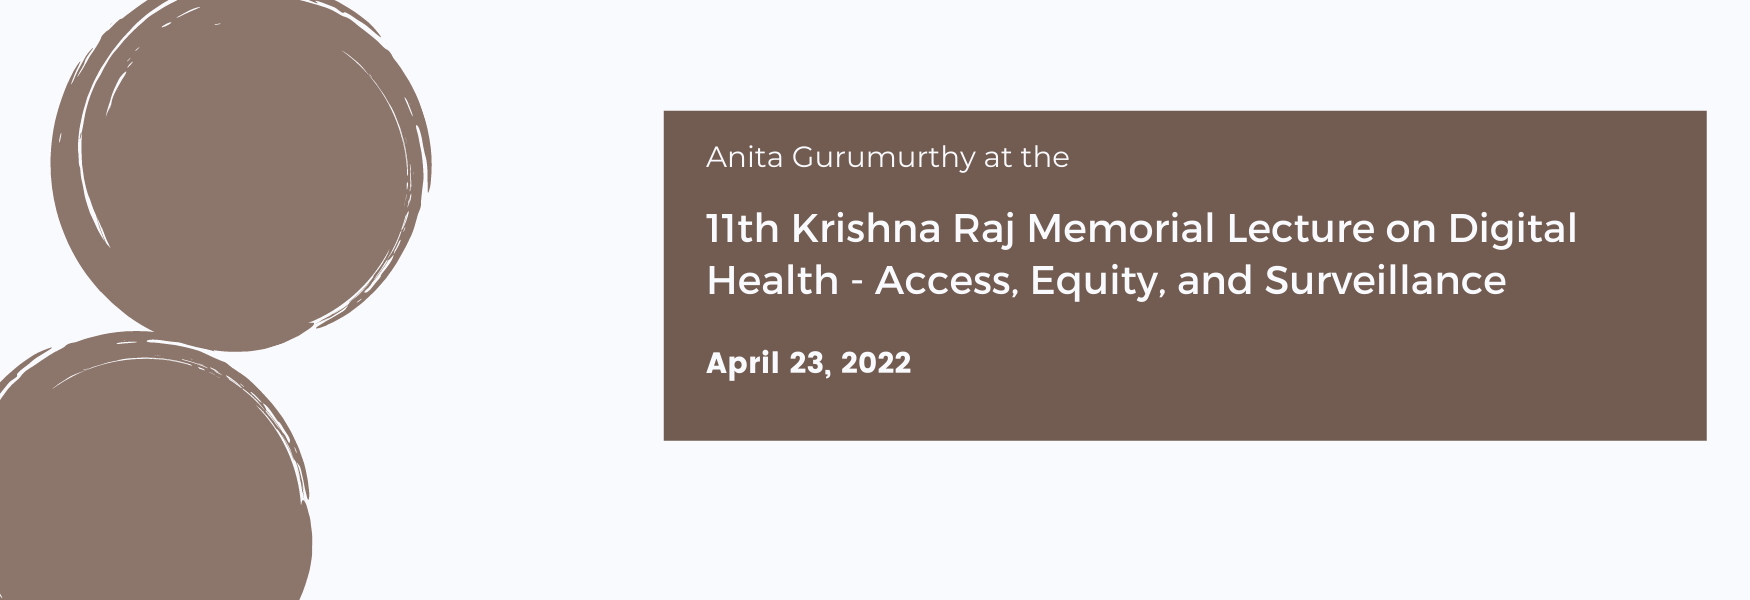 1th Krishna Raj Memorial Lecture on Digital Health - Access, Equity, and Surveillance